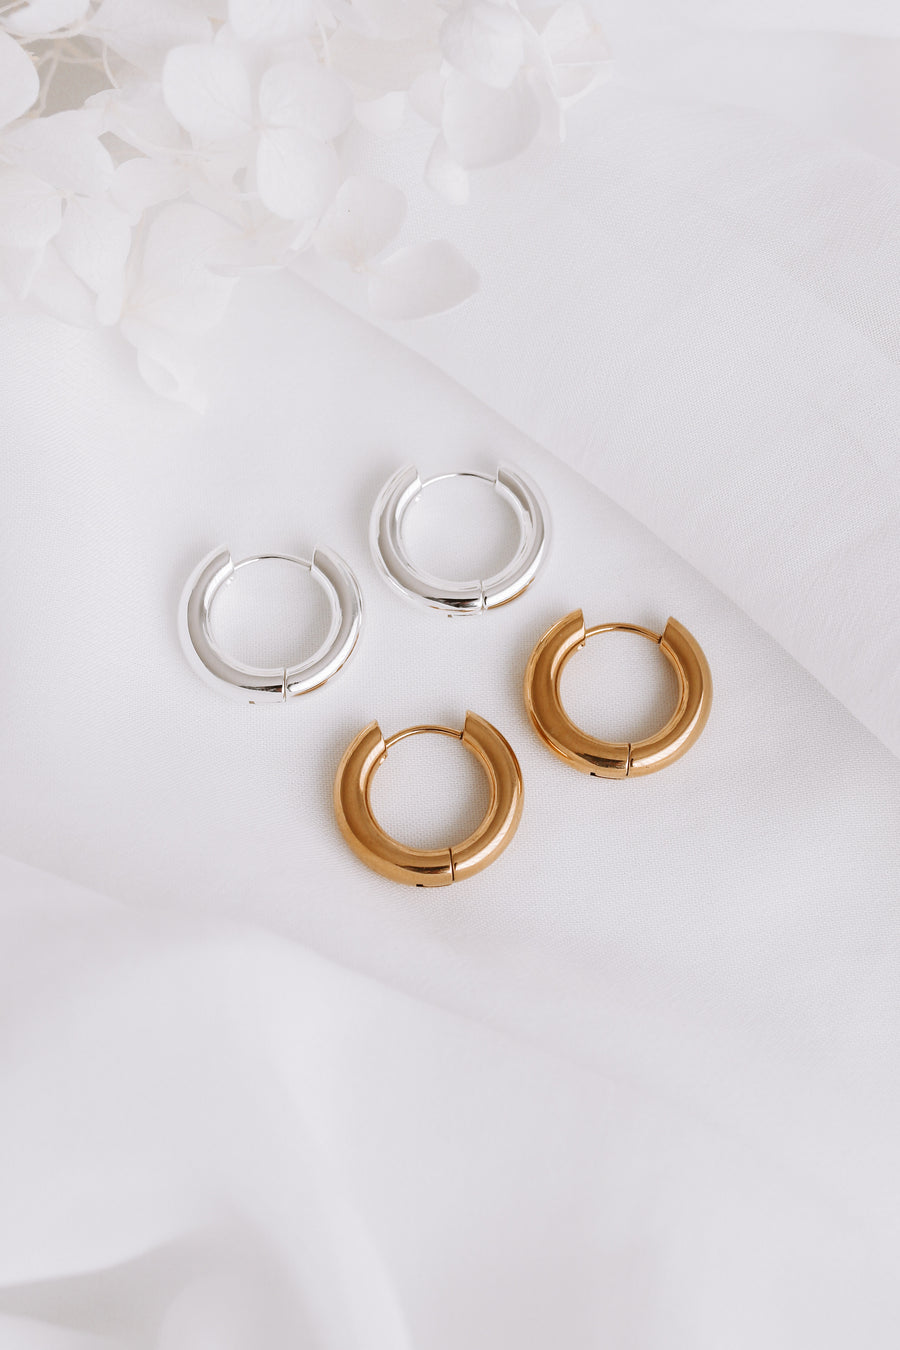 Indianna - Gold or Silver Plated Stainless Steel Hoops